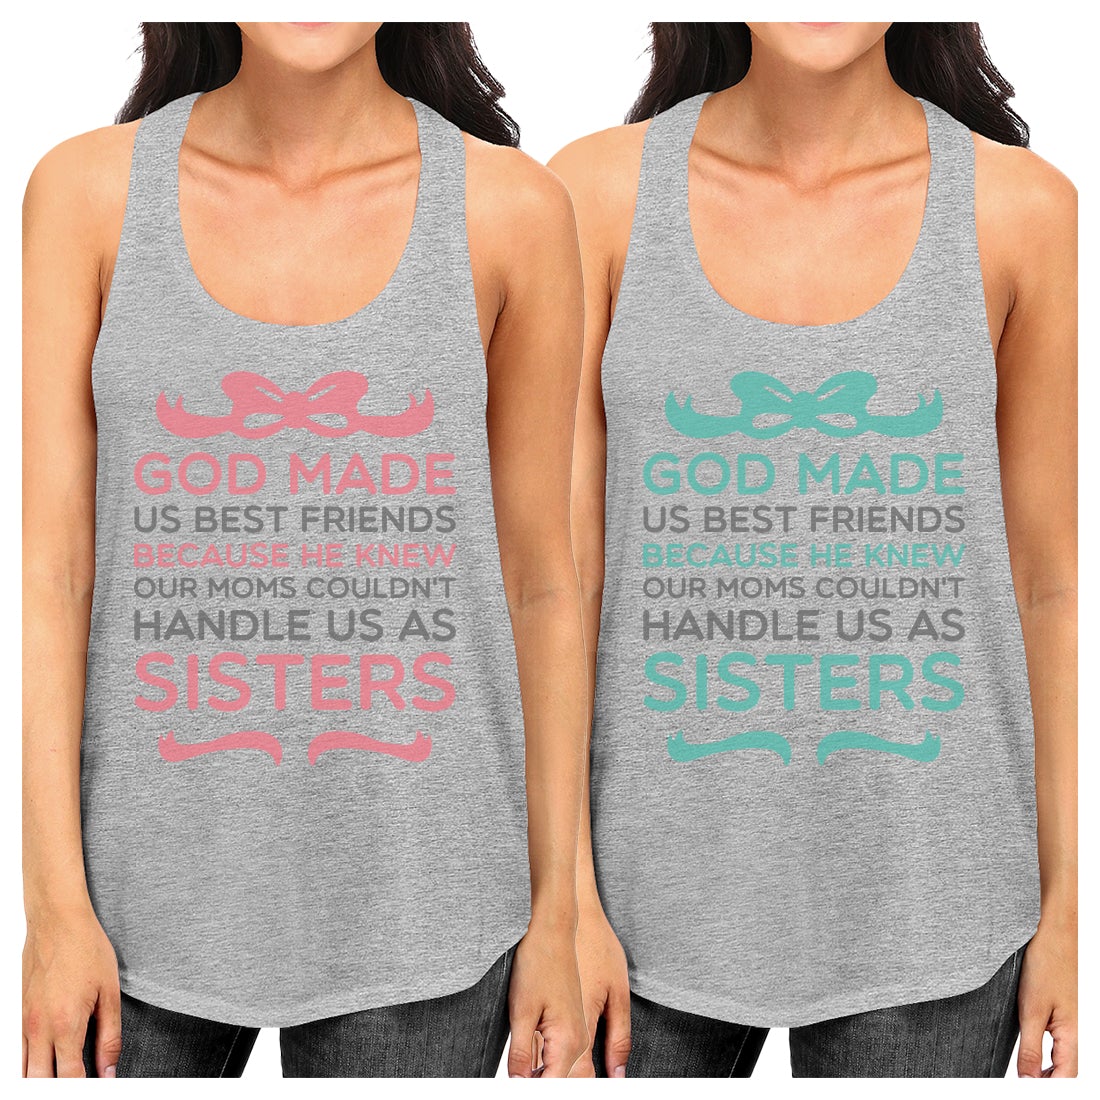 God Made Us Best Friend Gift Shirts Womens Cute Graphic Tank Tops Gray